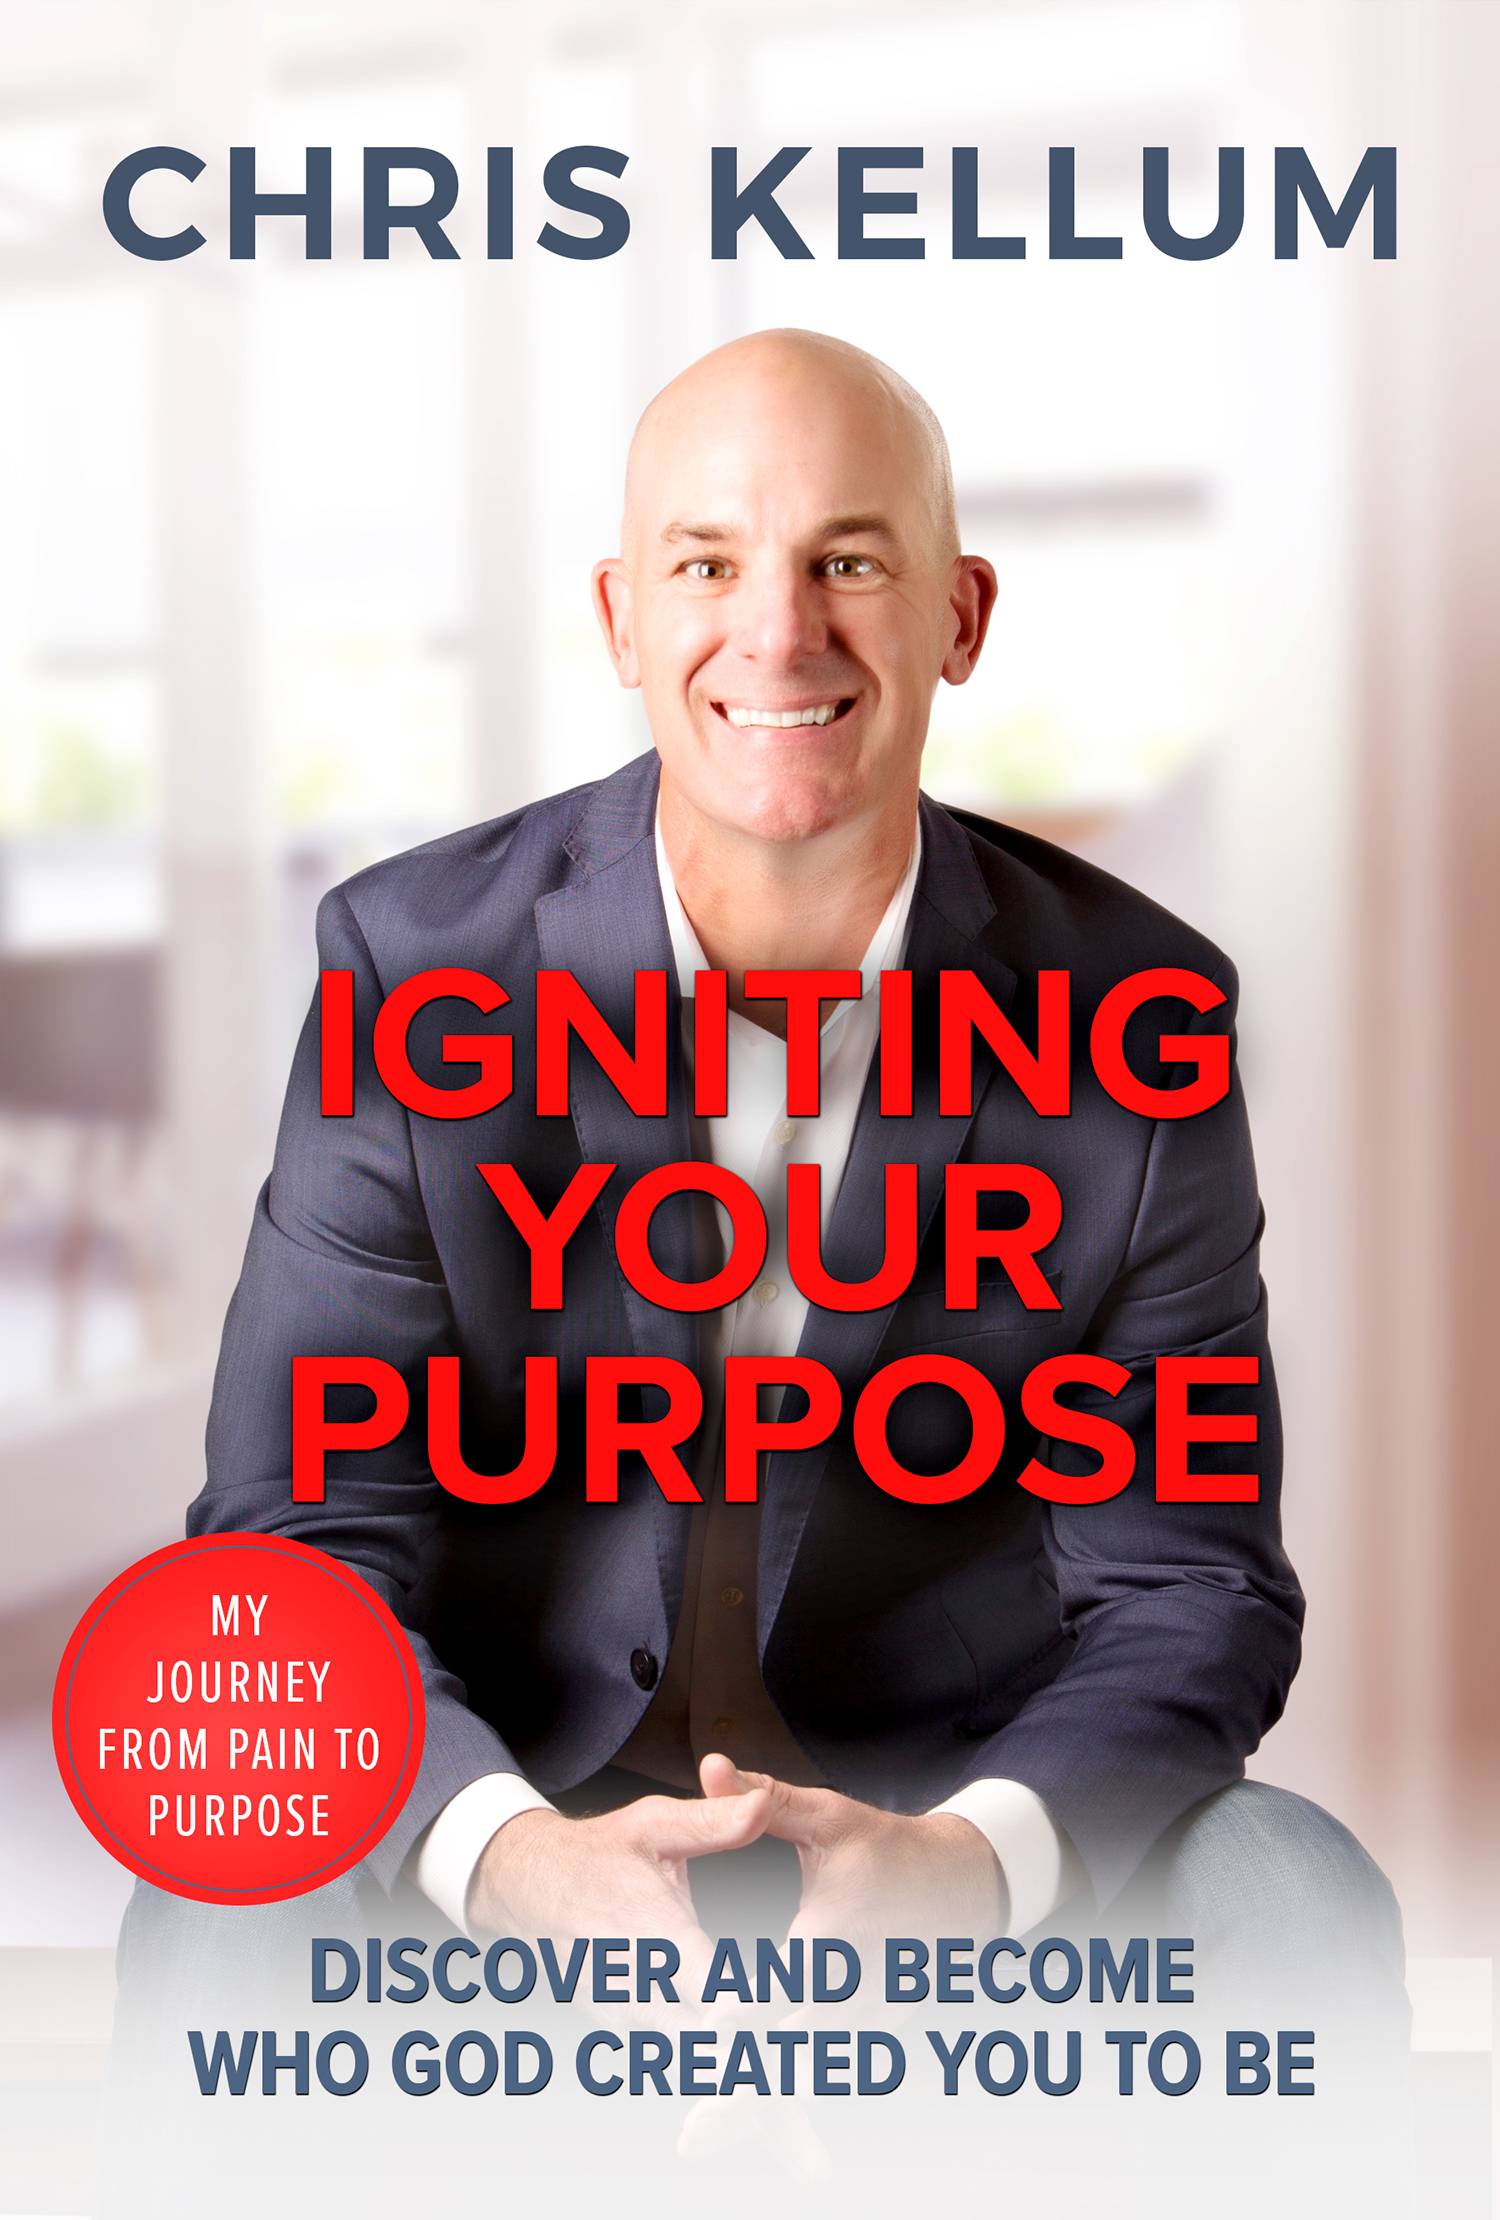 Chris Kellum sits in the middle of the cover with a large smile. At the top of the cover is his name CHRIS KELLUM. In the middle of the cover, overlayed over him beneath his face, is the title IGNITING YOUR PURPOSE. At the very bottom of the cover are the words DISCOVER AND BECOME WHO GOD CREATED YOU TO BE.